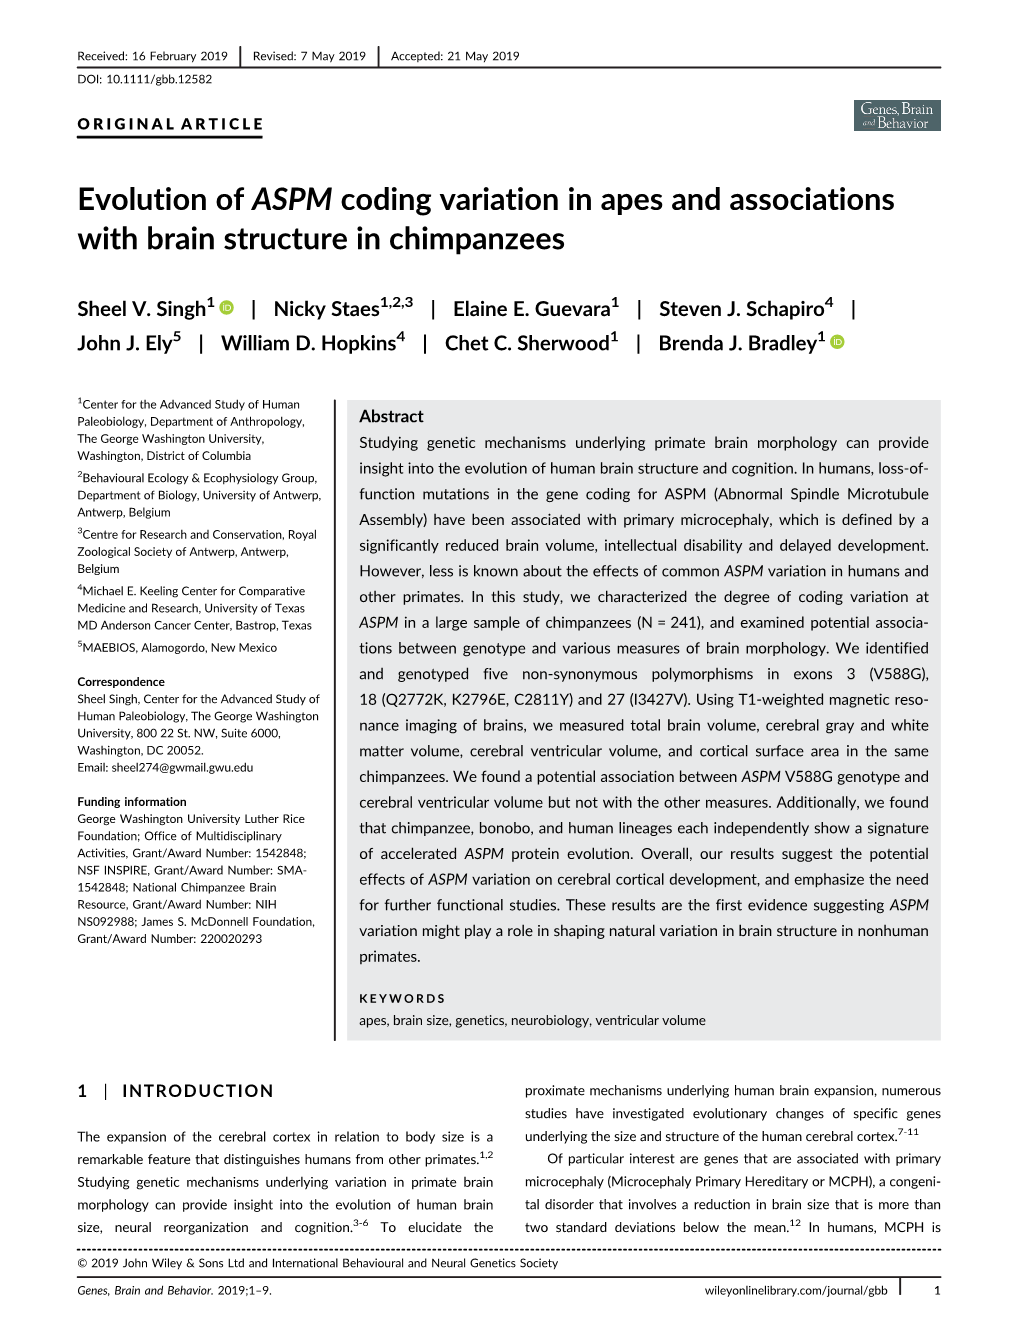 Evolution of ASPM Coding Variation in Apes and Associations with Brain Structure in Chimpanzees